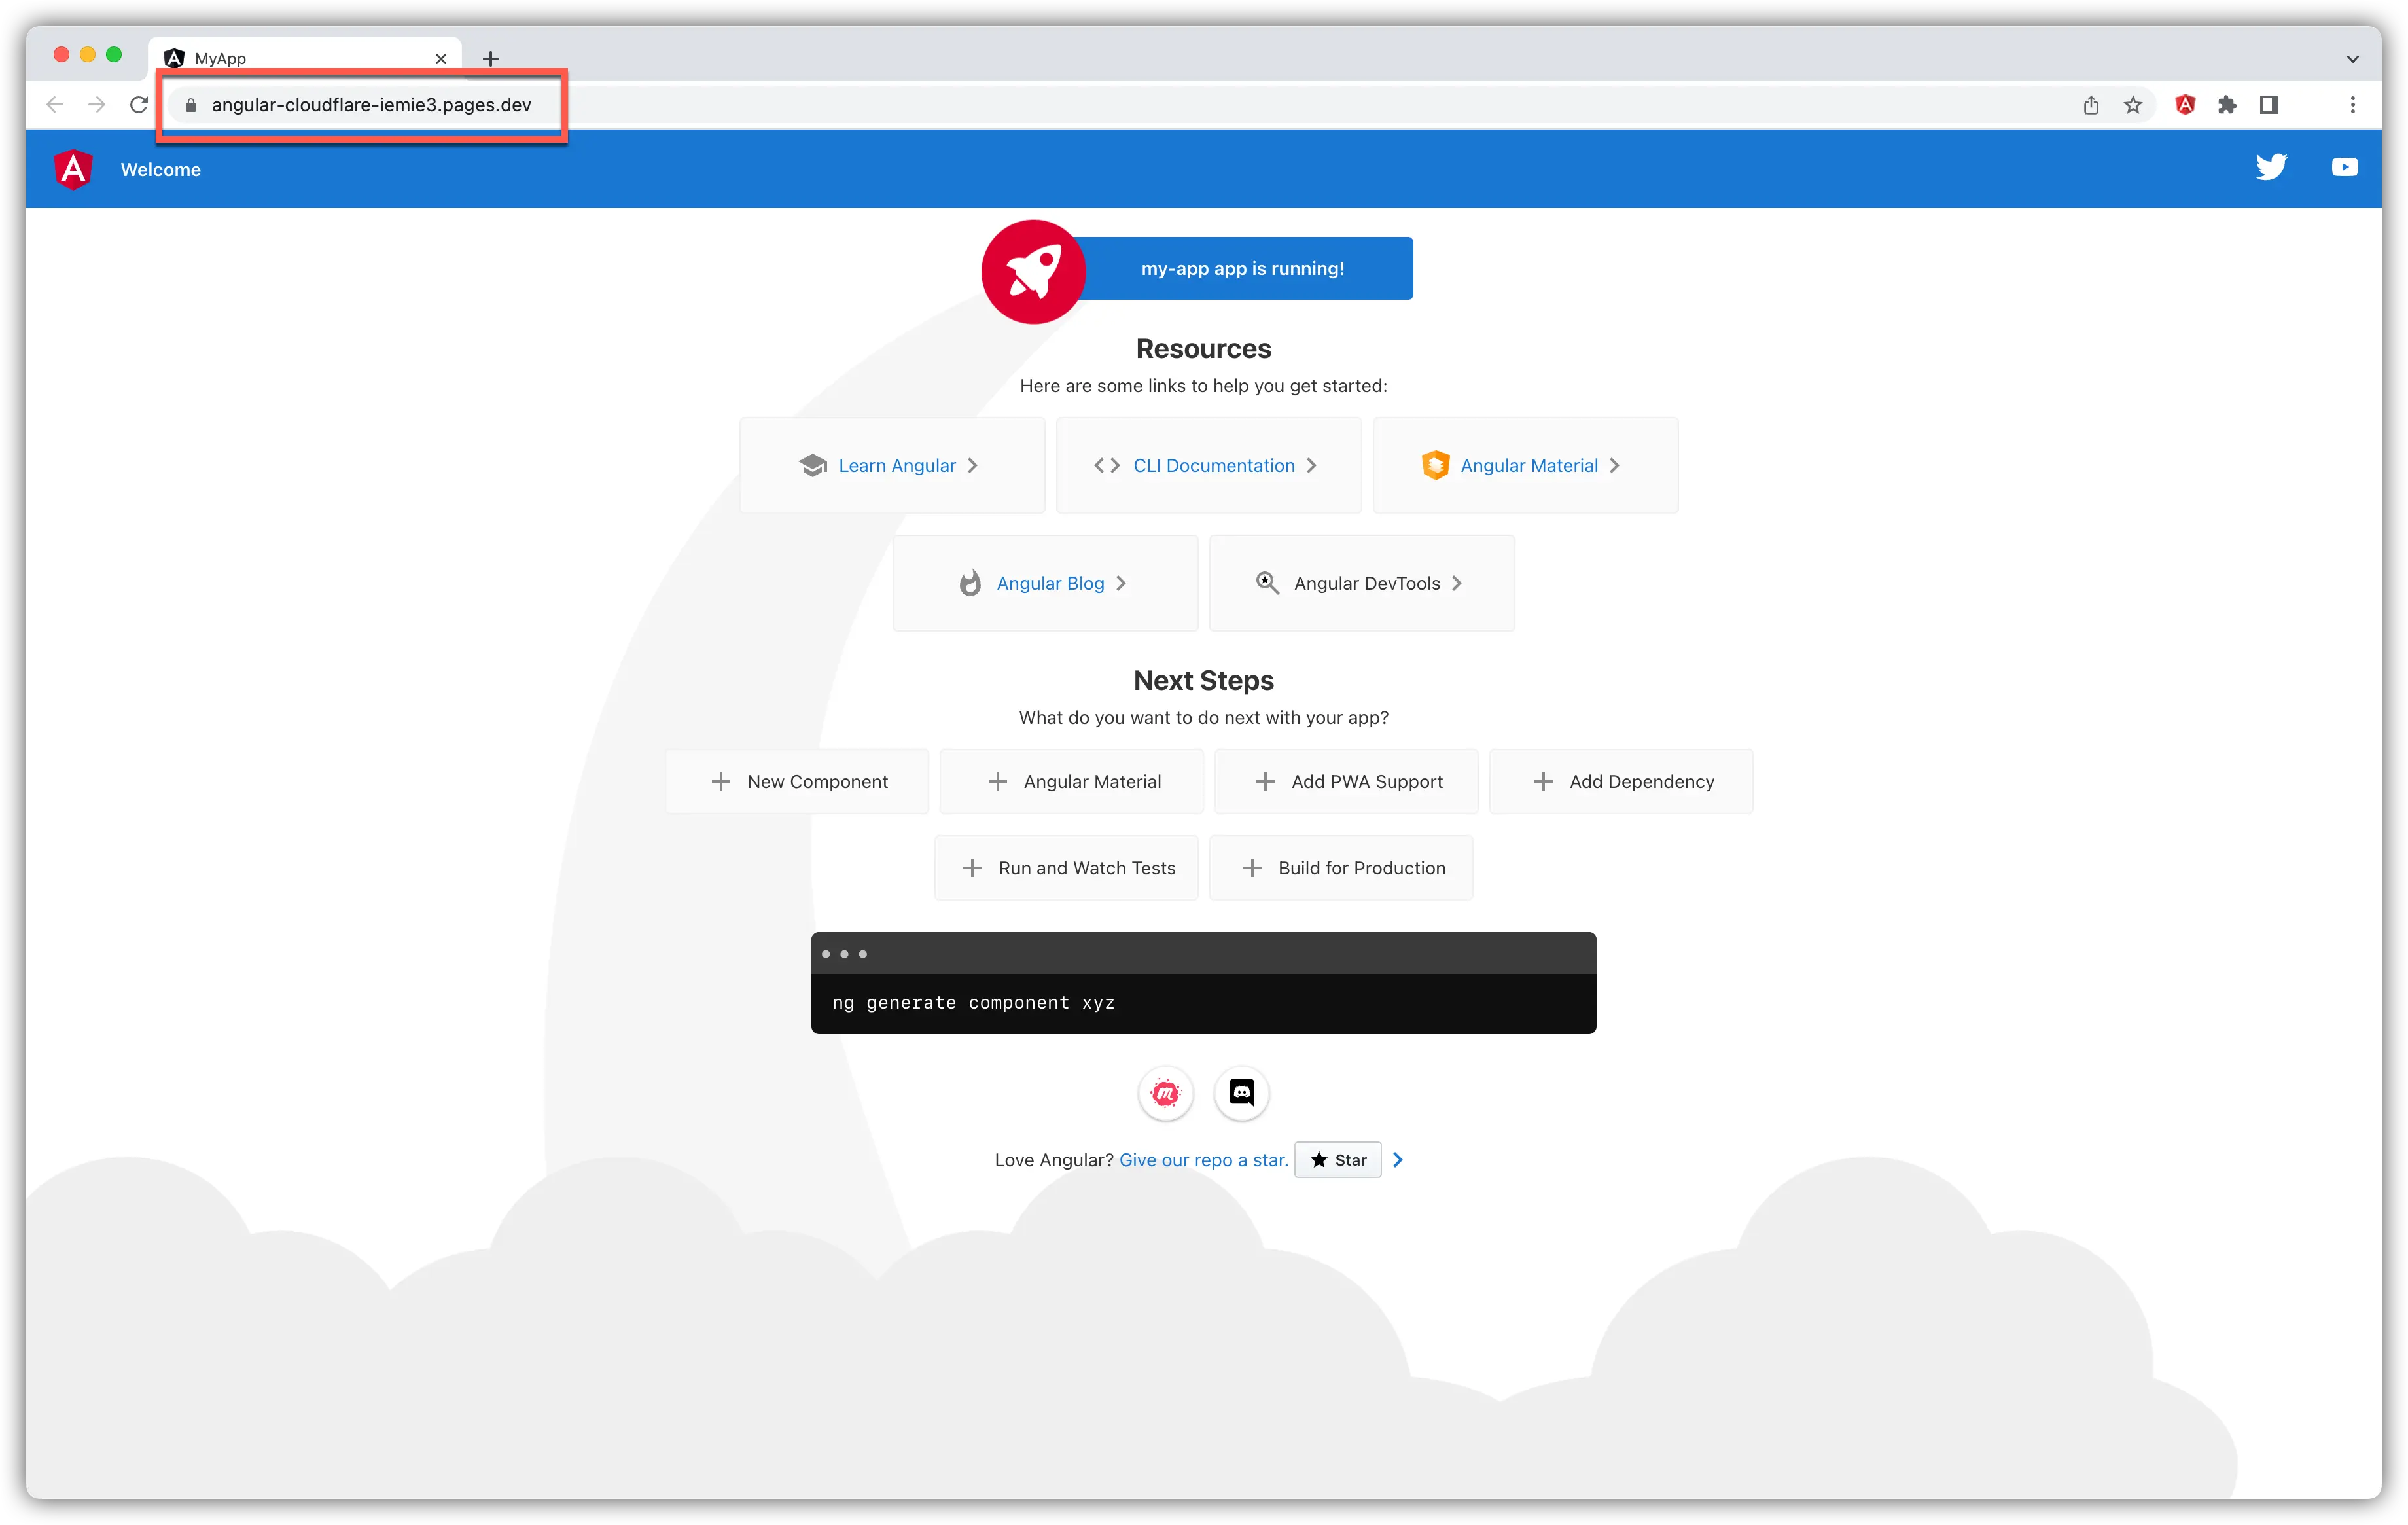 angular-app-cloudflare-pages-17.webp